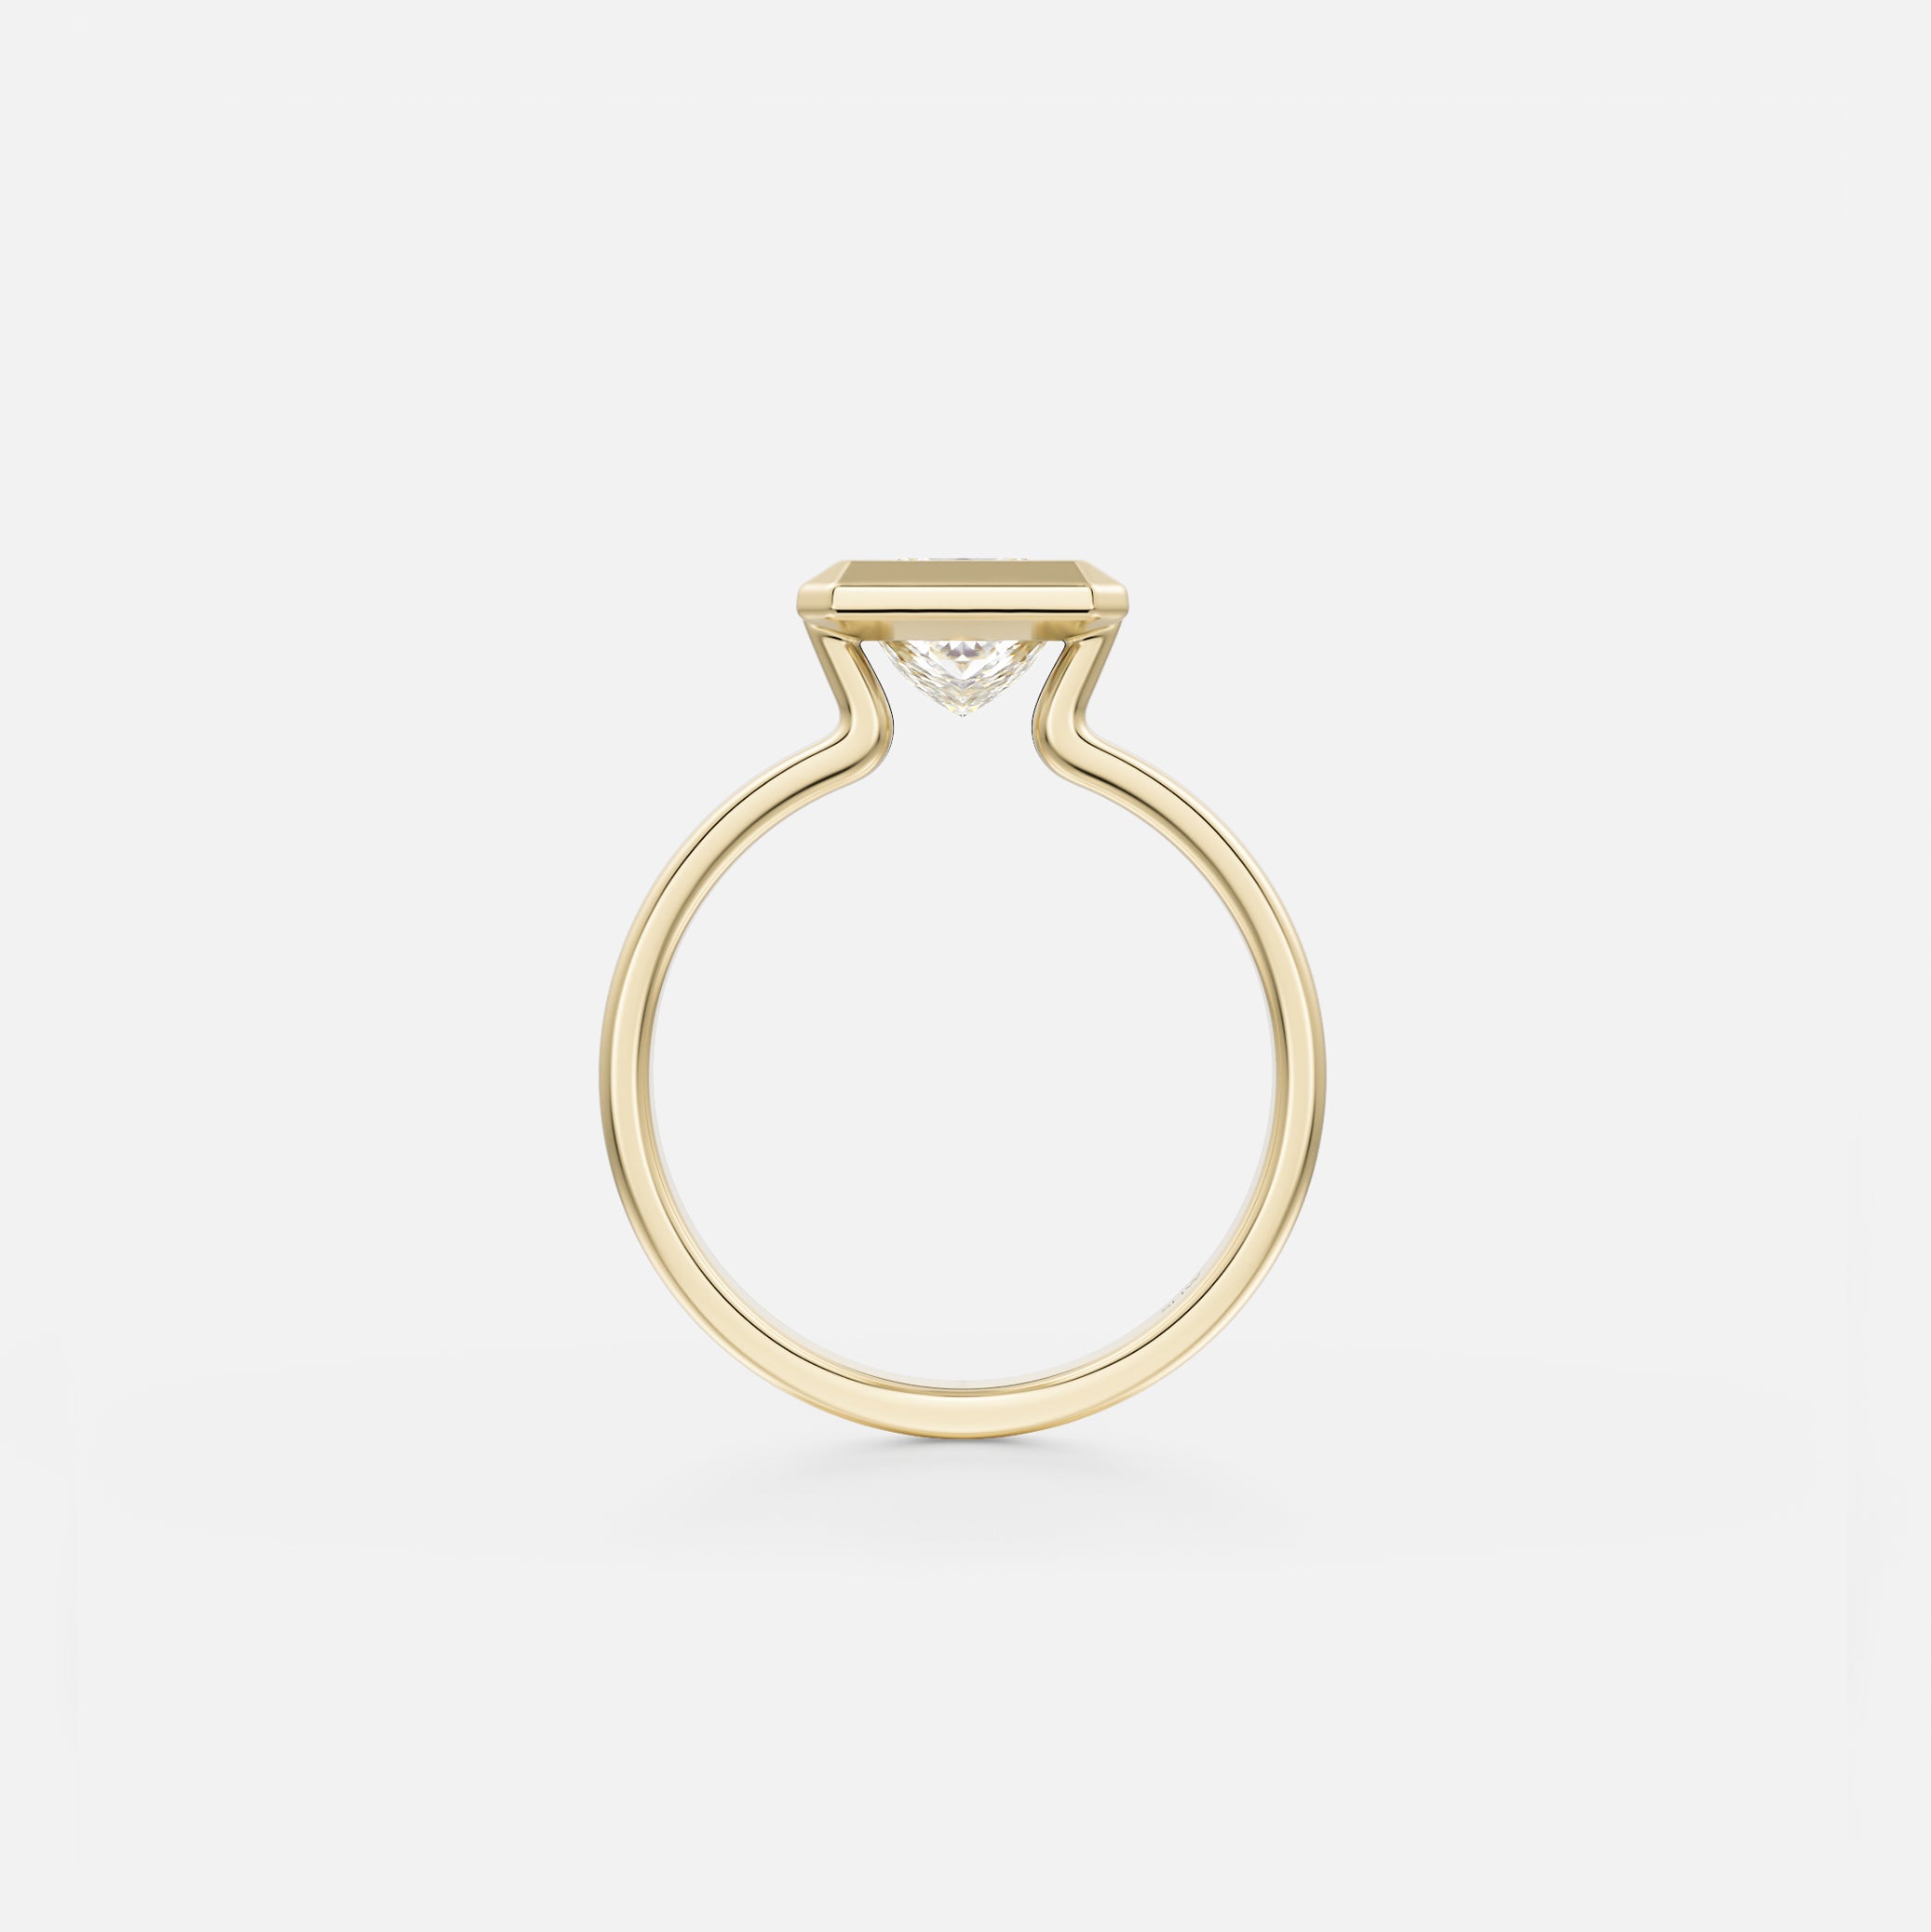 Vilke Flat Band with Princess Contemporary Engagement Ring Sculptural Bezel Setting in sustainable recycled 14k Gold or platinum by SHW Fine Jewelry New York City